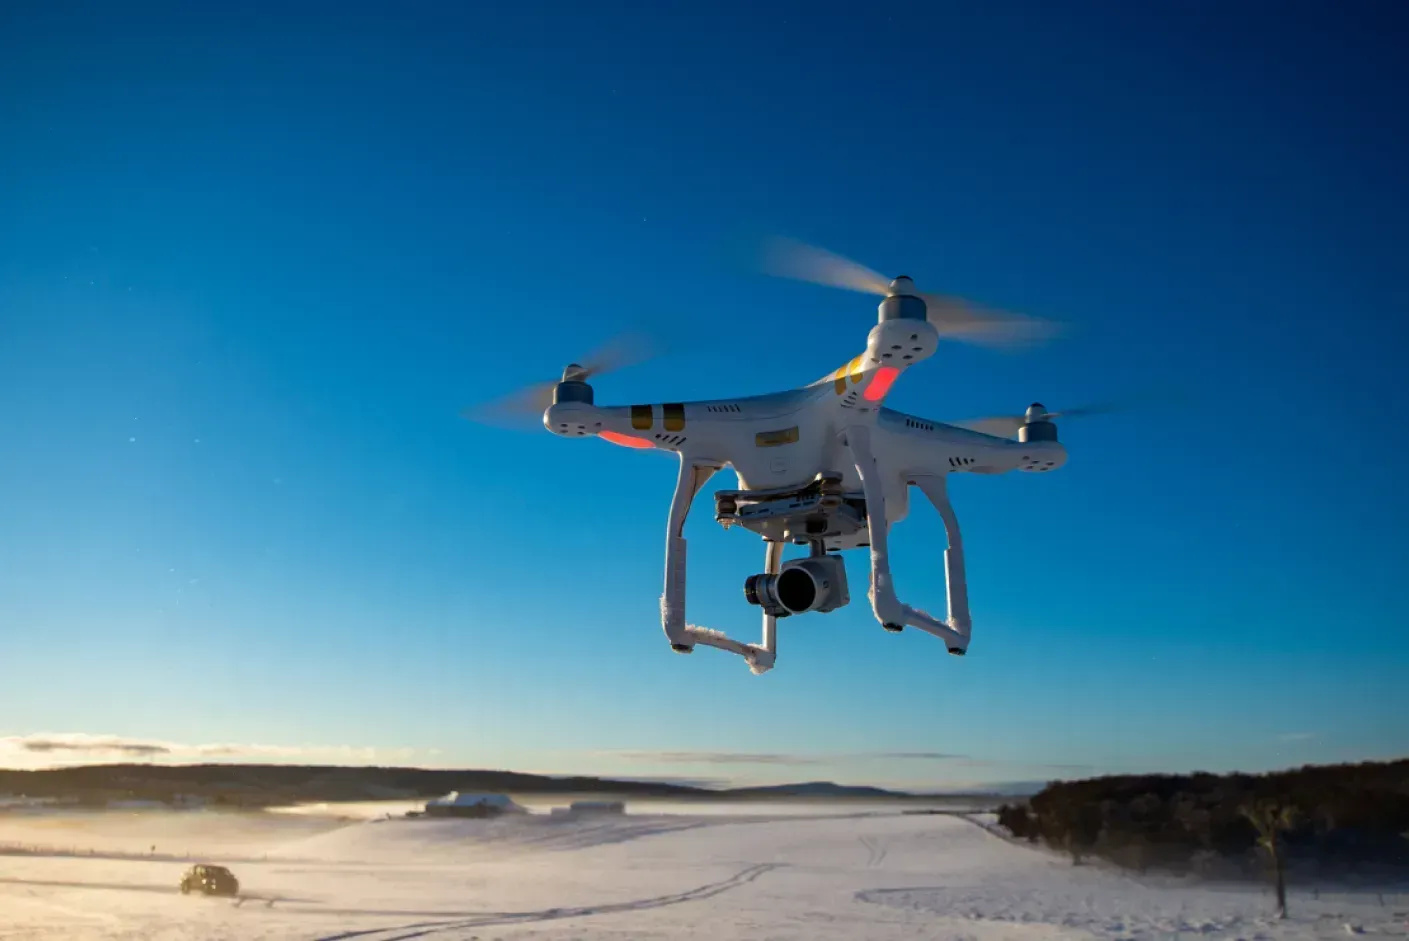 Start preparation of australia drone licence using our practice test